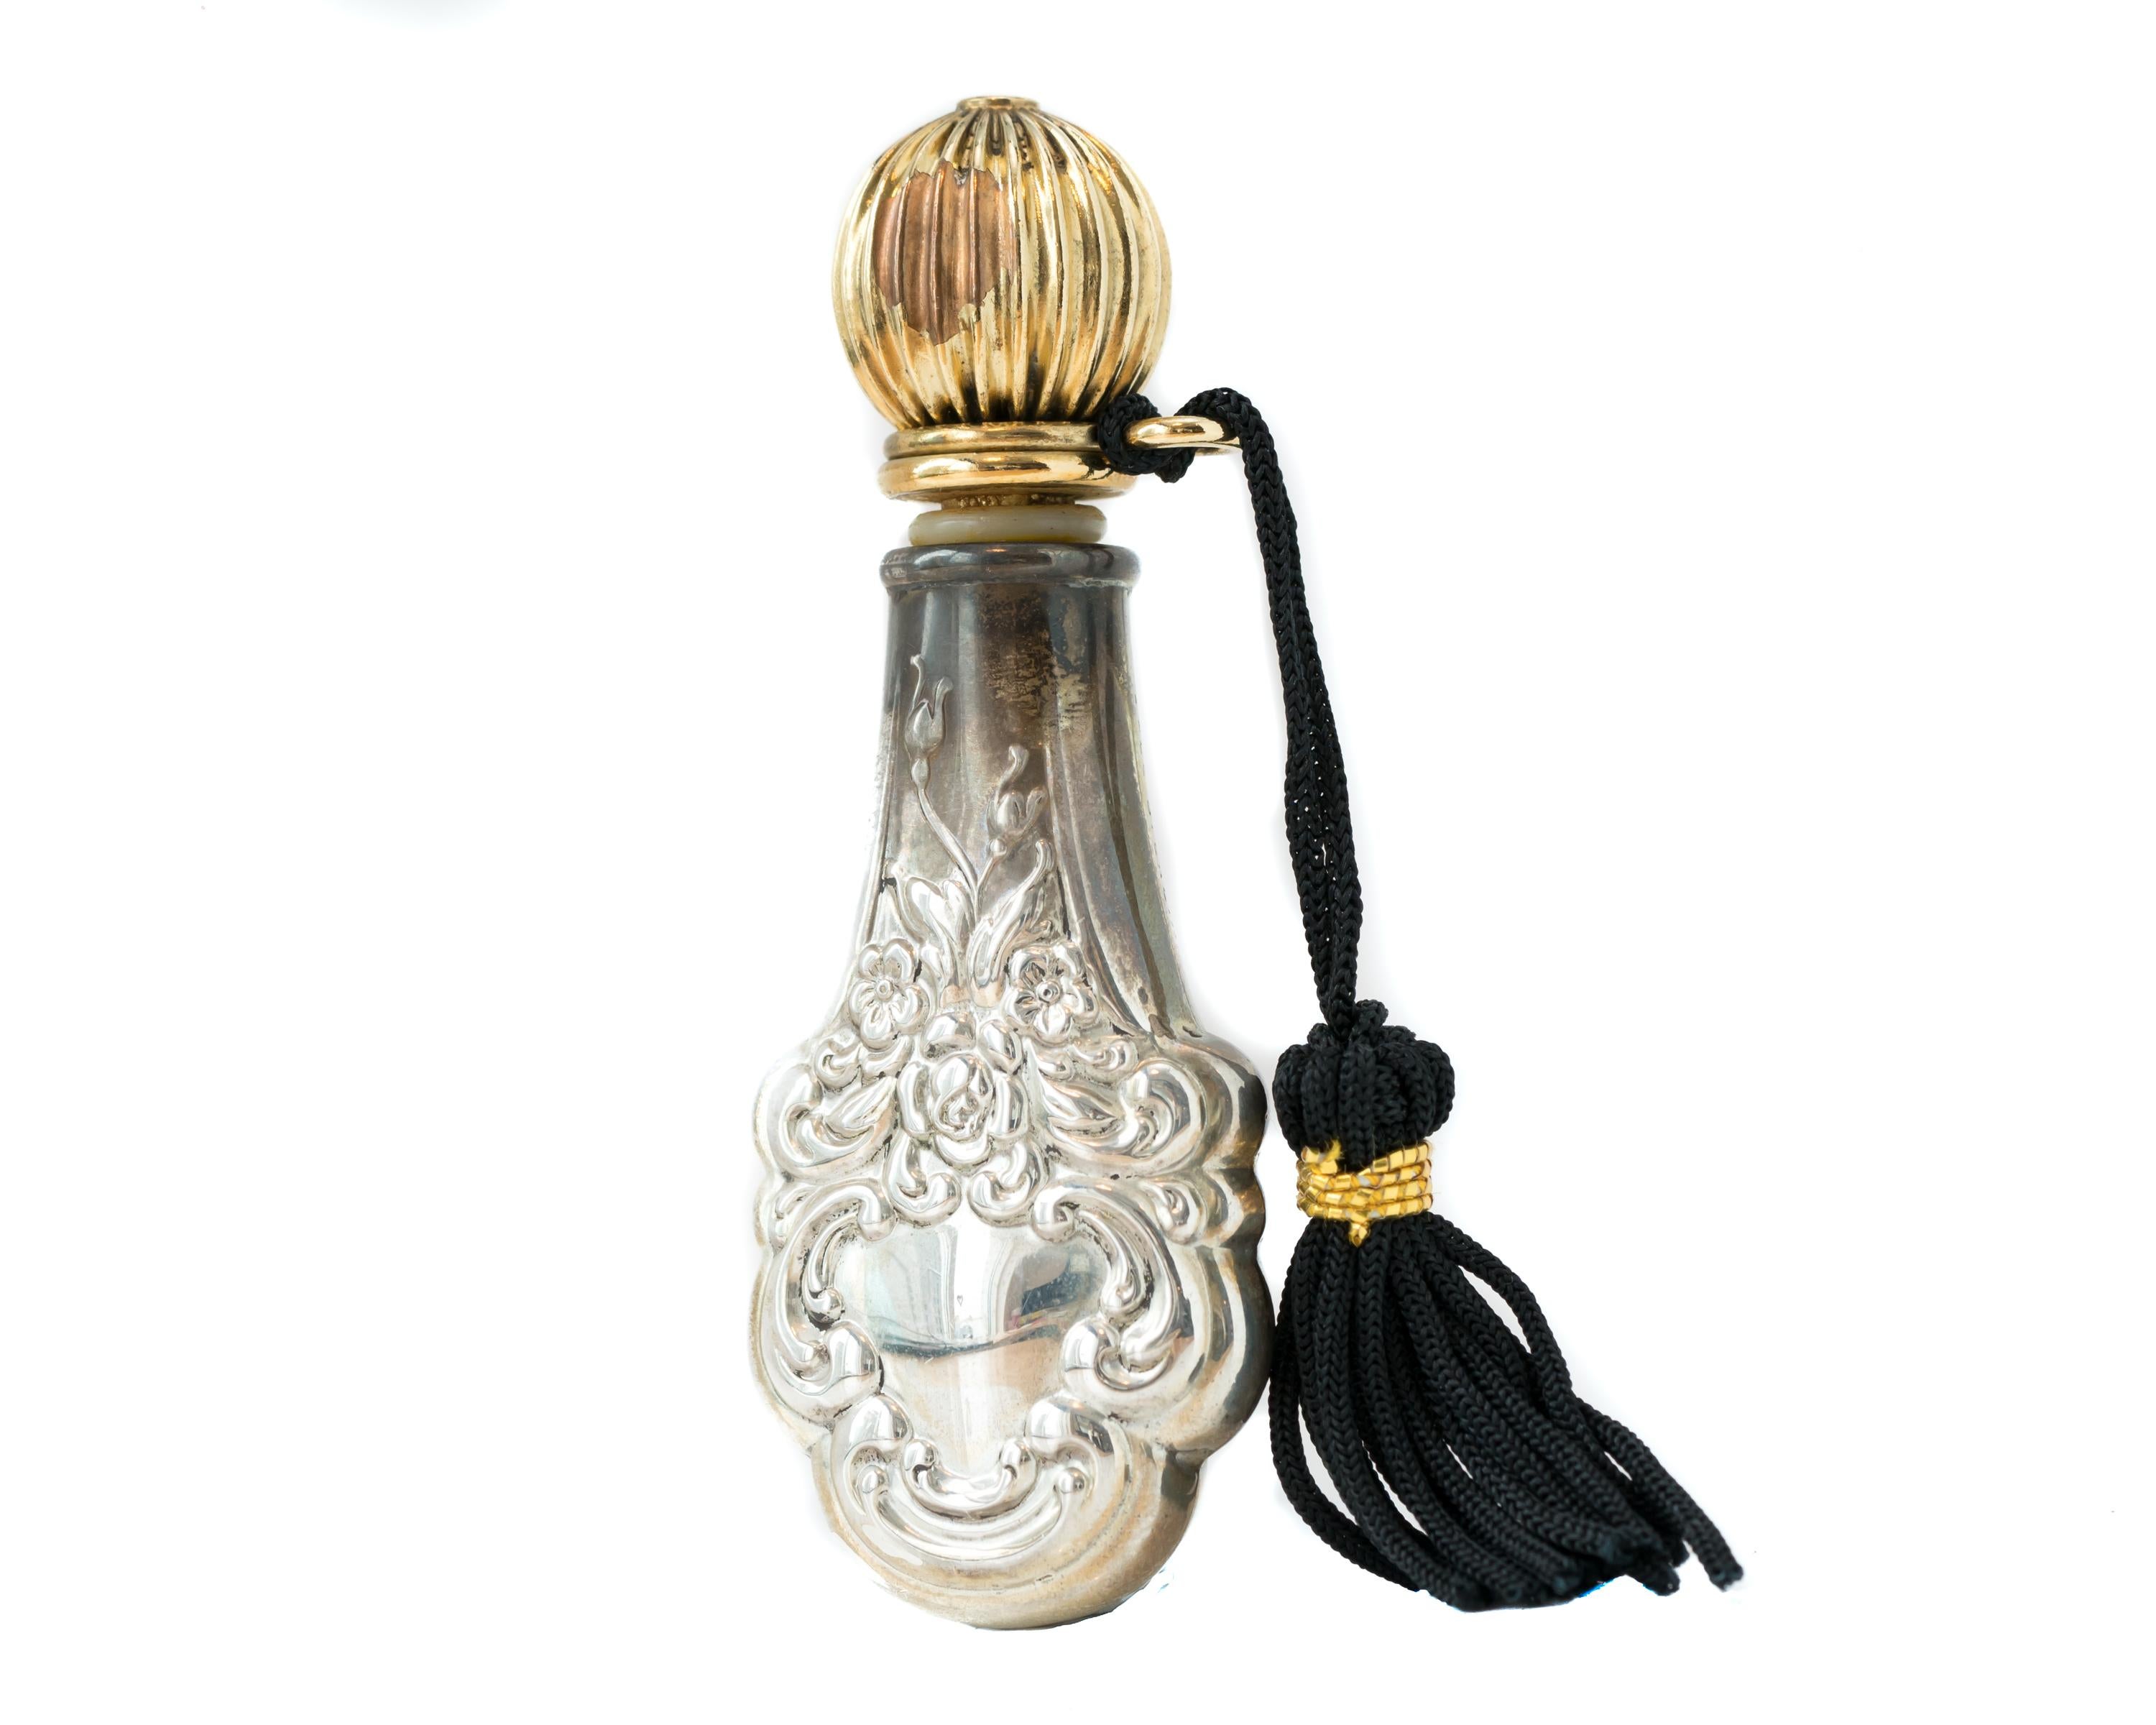 Art Deco Purse Size Perfume Flask - Sterling Silver

Features:
Towle Sterling Silver
Art Deco Floral Design
Gold Tone Applicator
Threaded Screw In Applicator Top
Removable Black Cord Tassle with Gold Accent
Elegant Vintage Scent lingers within the